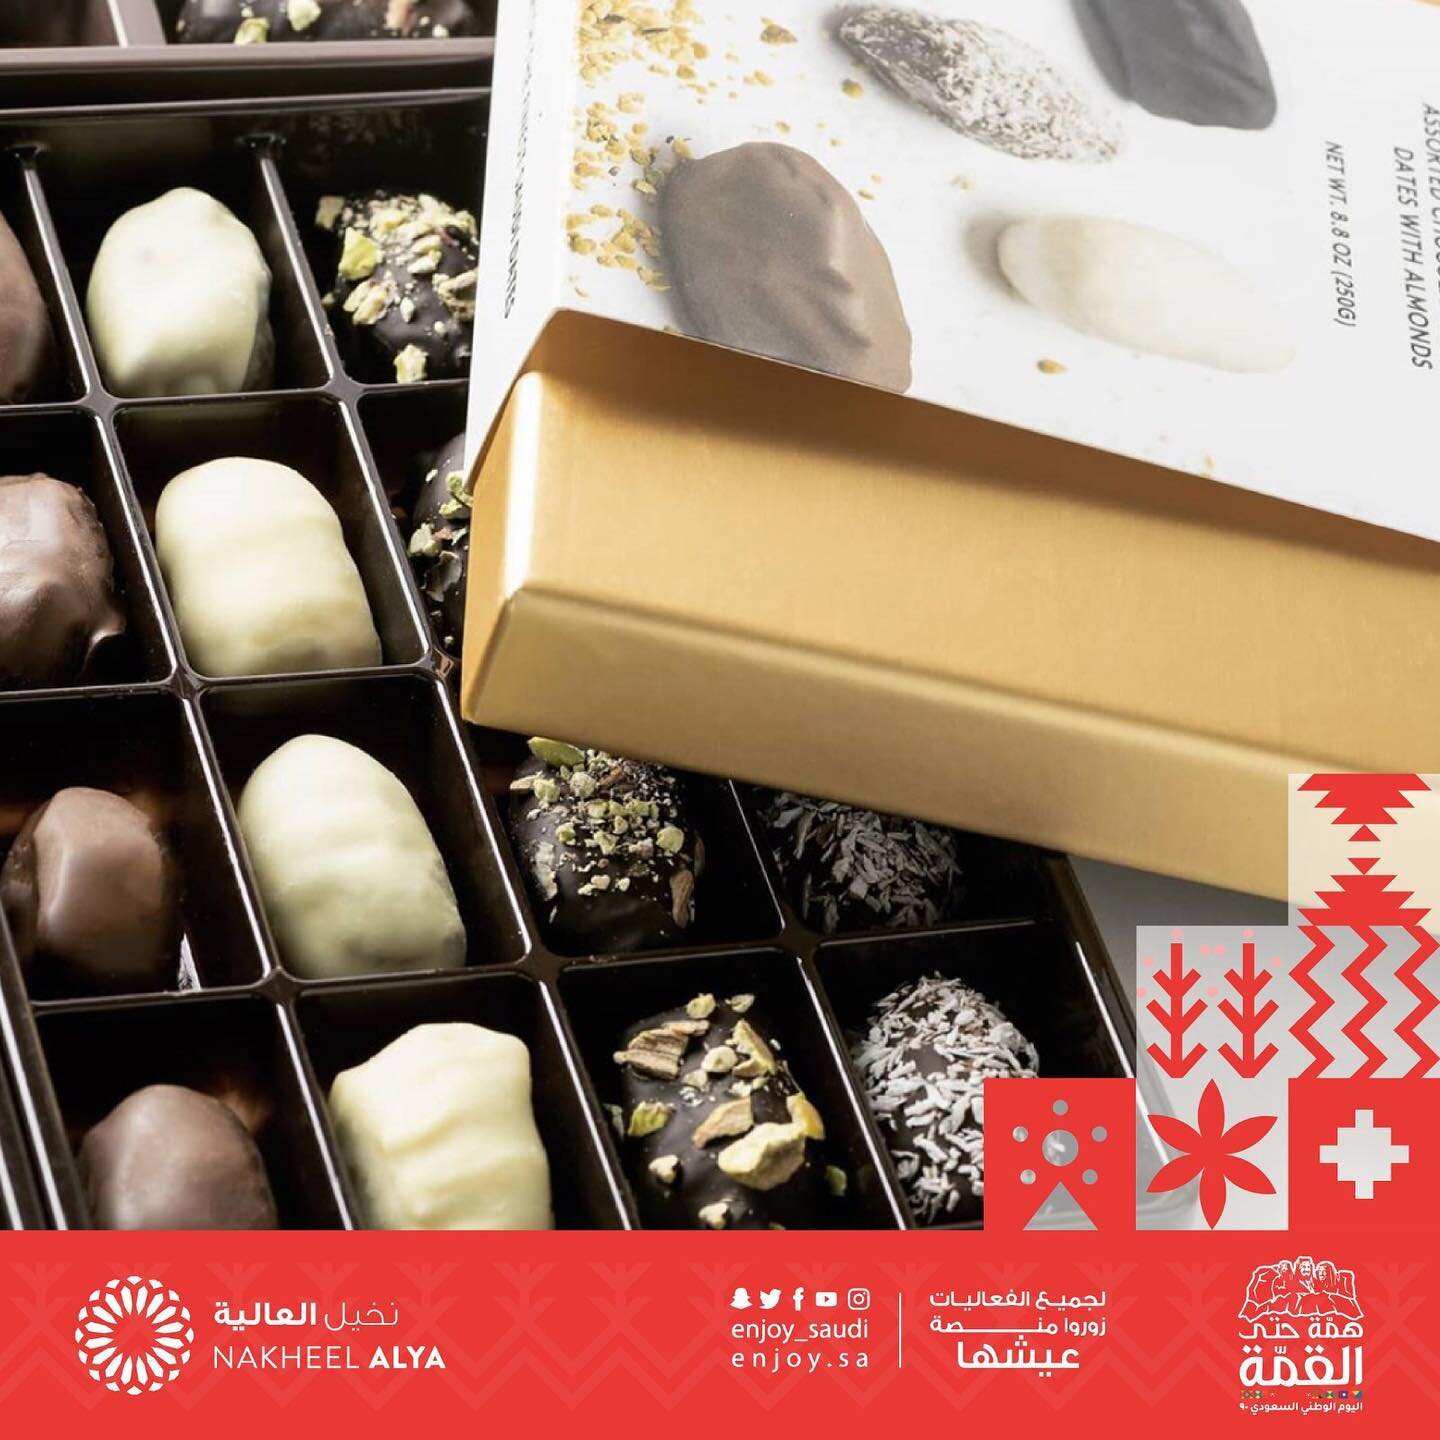 Try our latest range of rich chocolate dates with a range of toppings... it makes a perfect locally-made gift!
__
#nakheelalya #saudiarabia #saudinationalday #dates #chocolatedates #chocolate #gift #festive #celebrate #datefruit #almond #pistachio #c